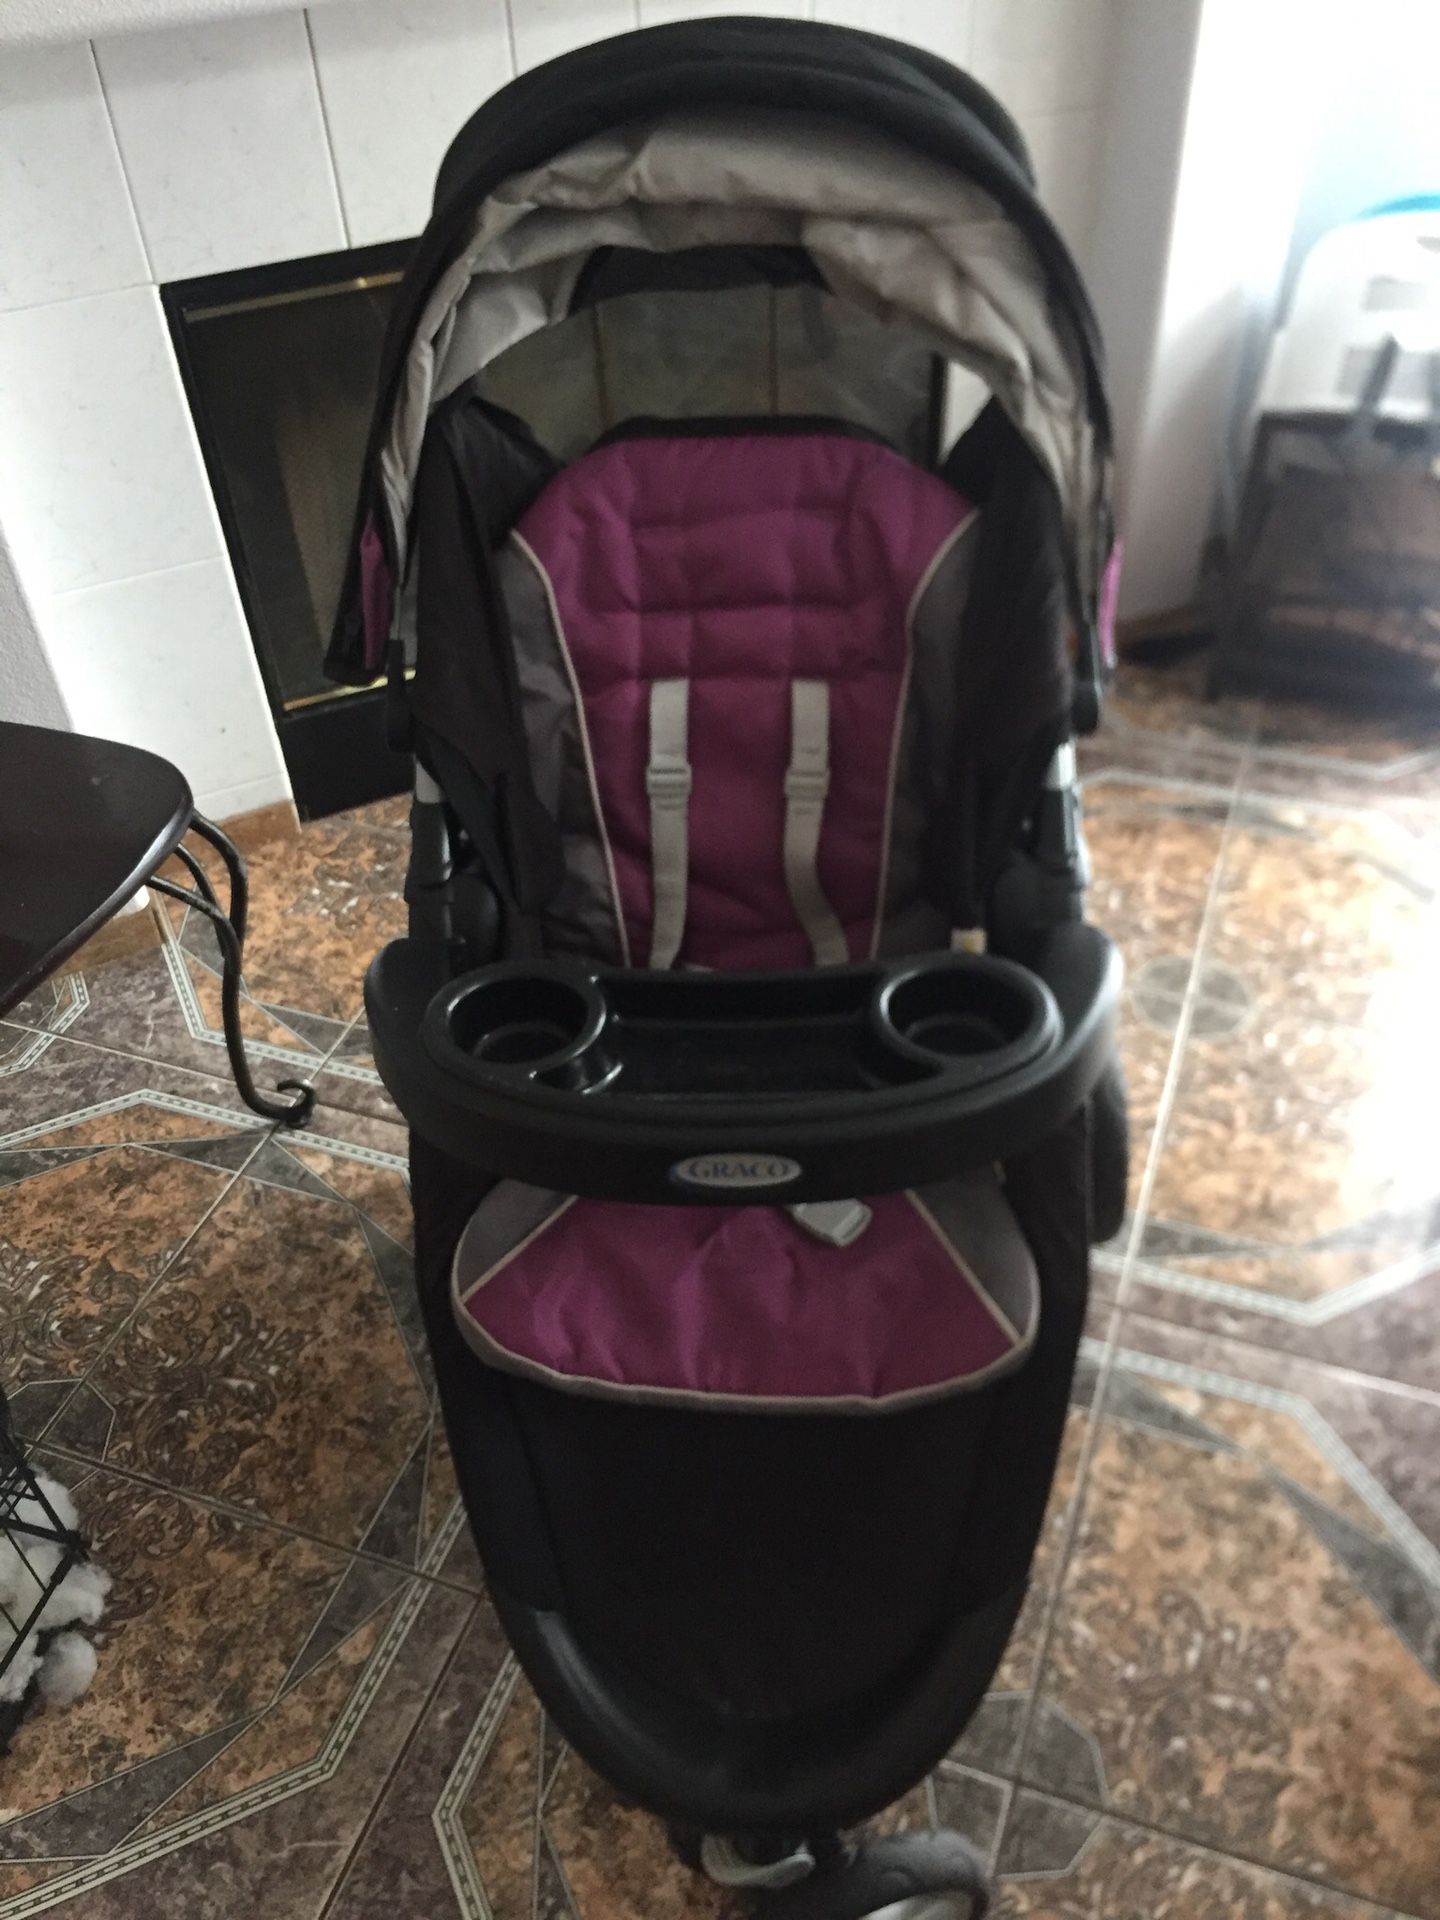 Graco Baby stroller and car seat purple